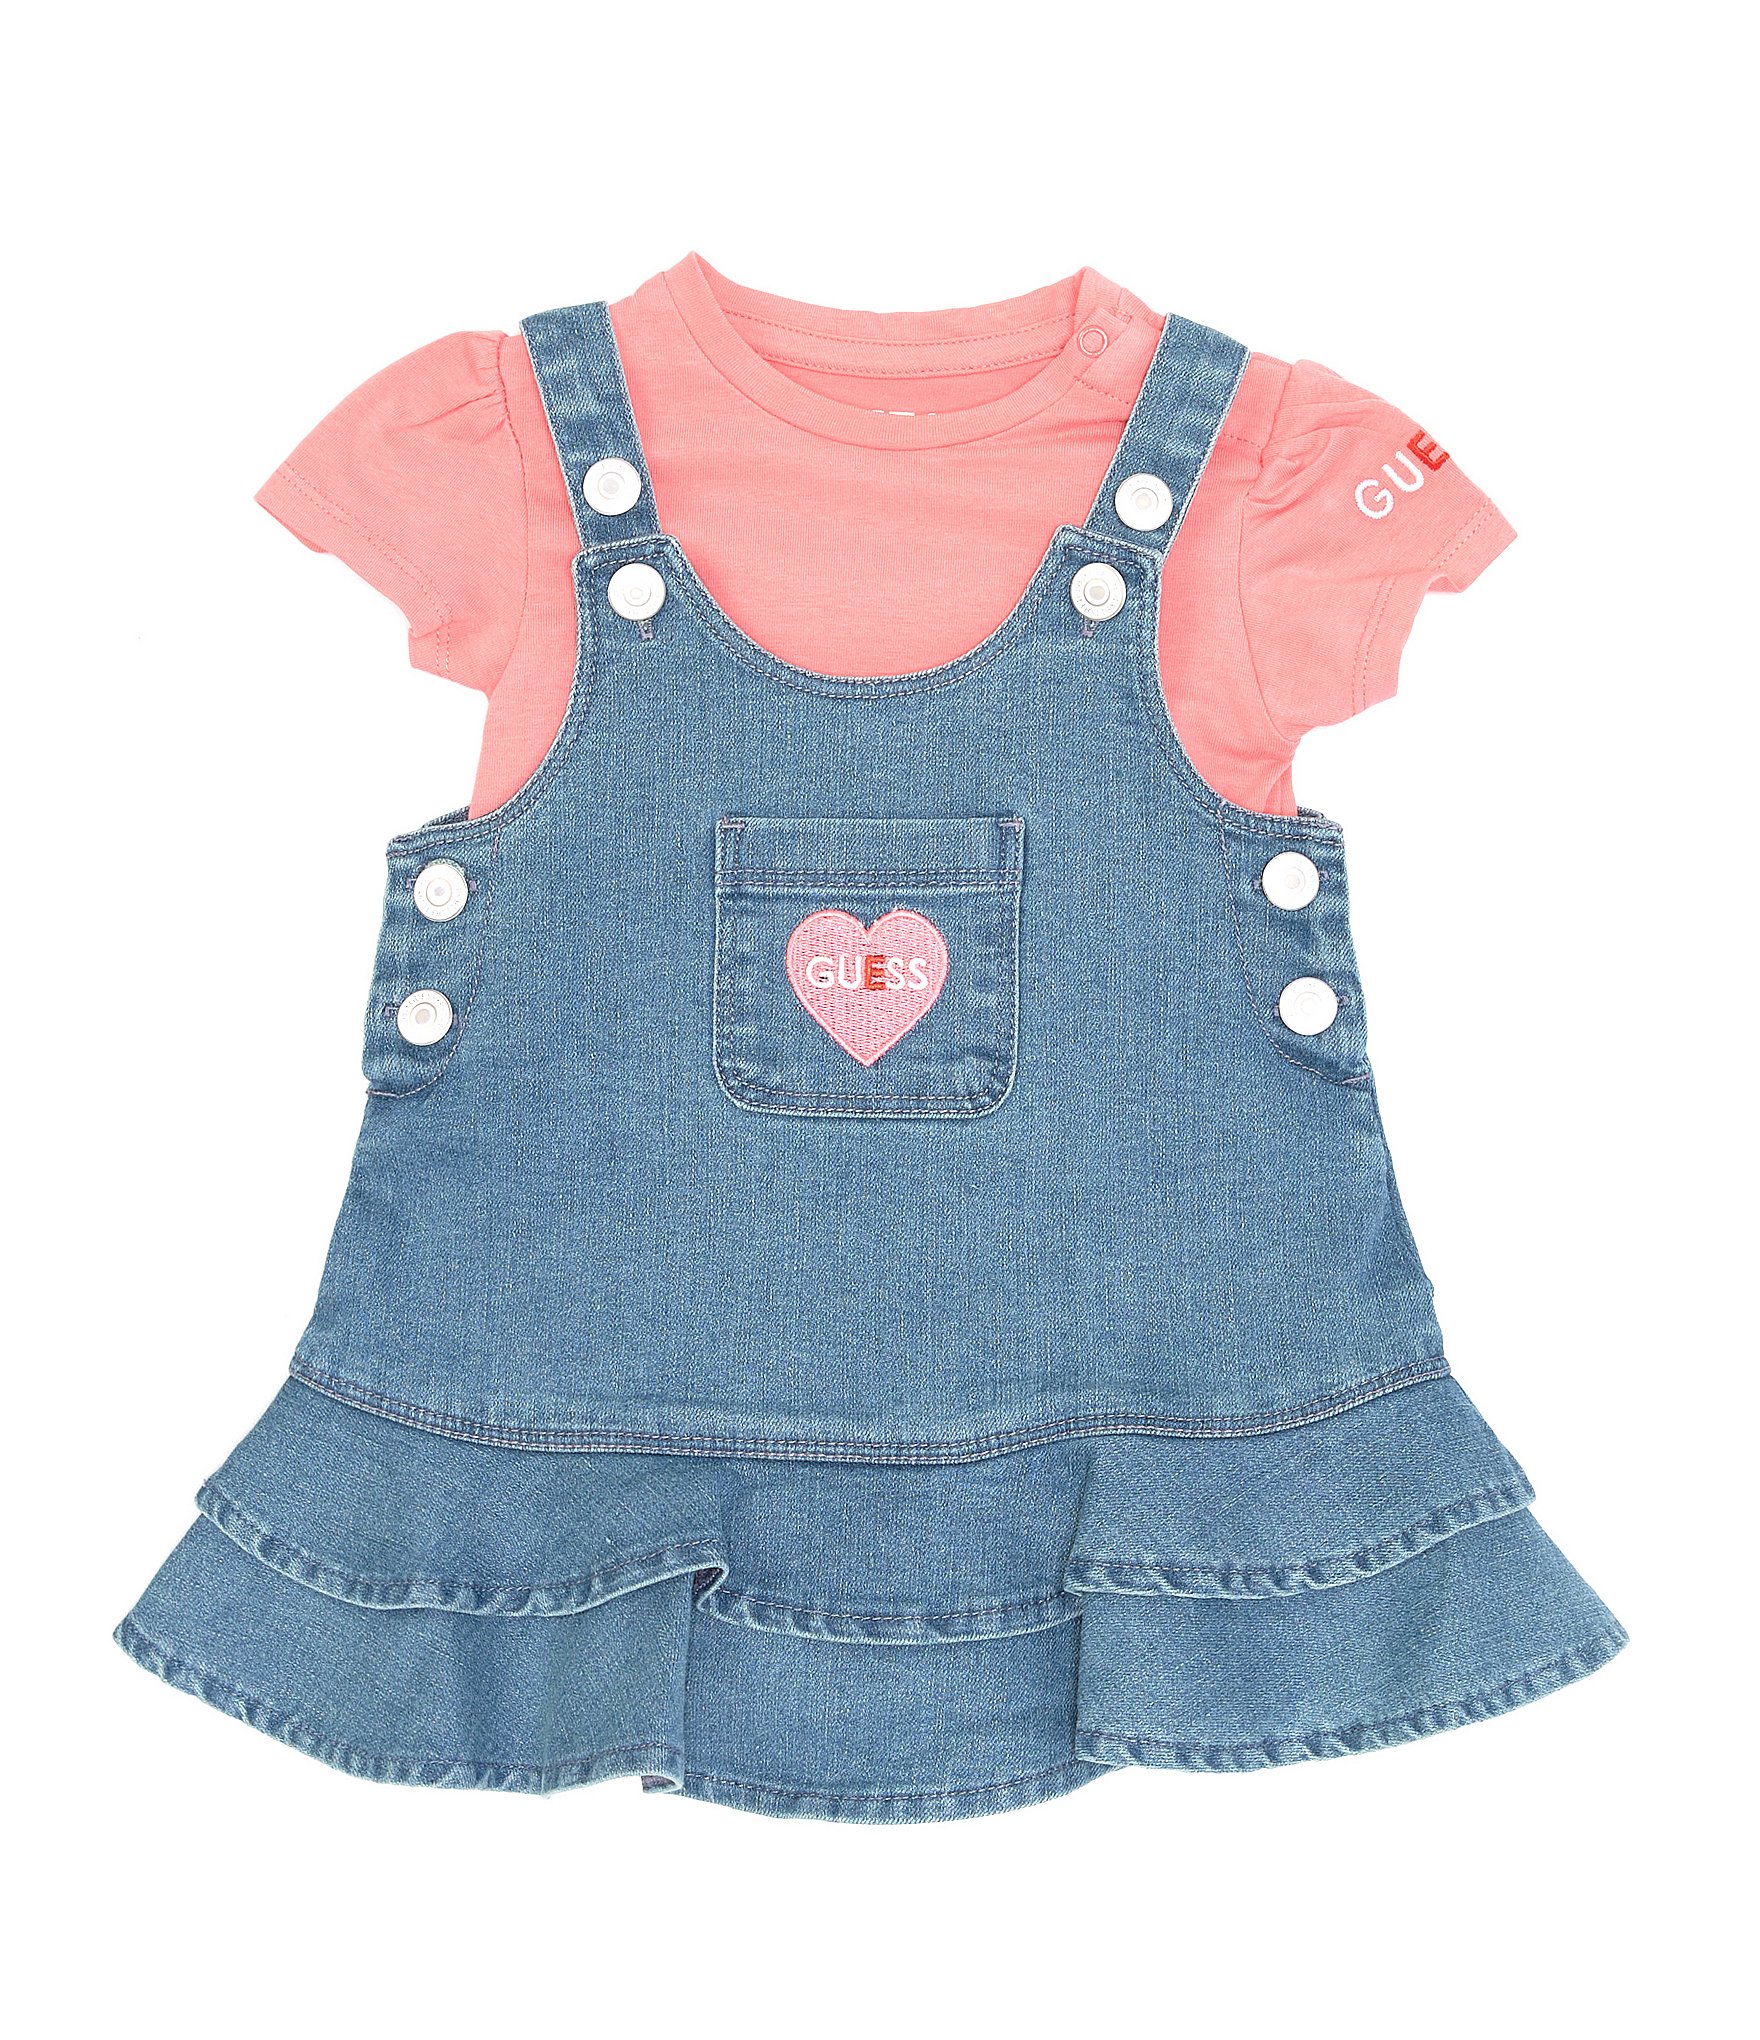 NEW GUESS BABY GIRL'S GUESS LOS ANGELES SHORT SLEEVE BODYSUIT. 6-9M